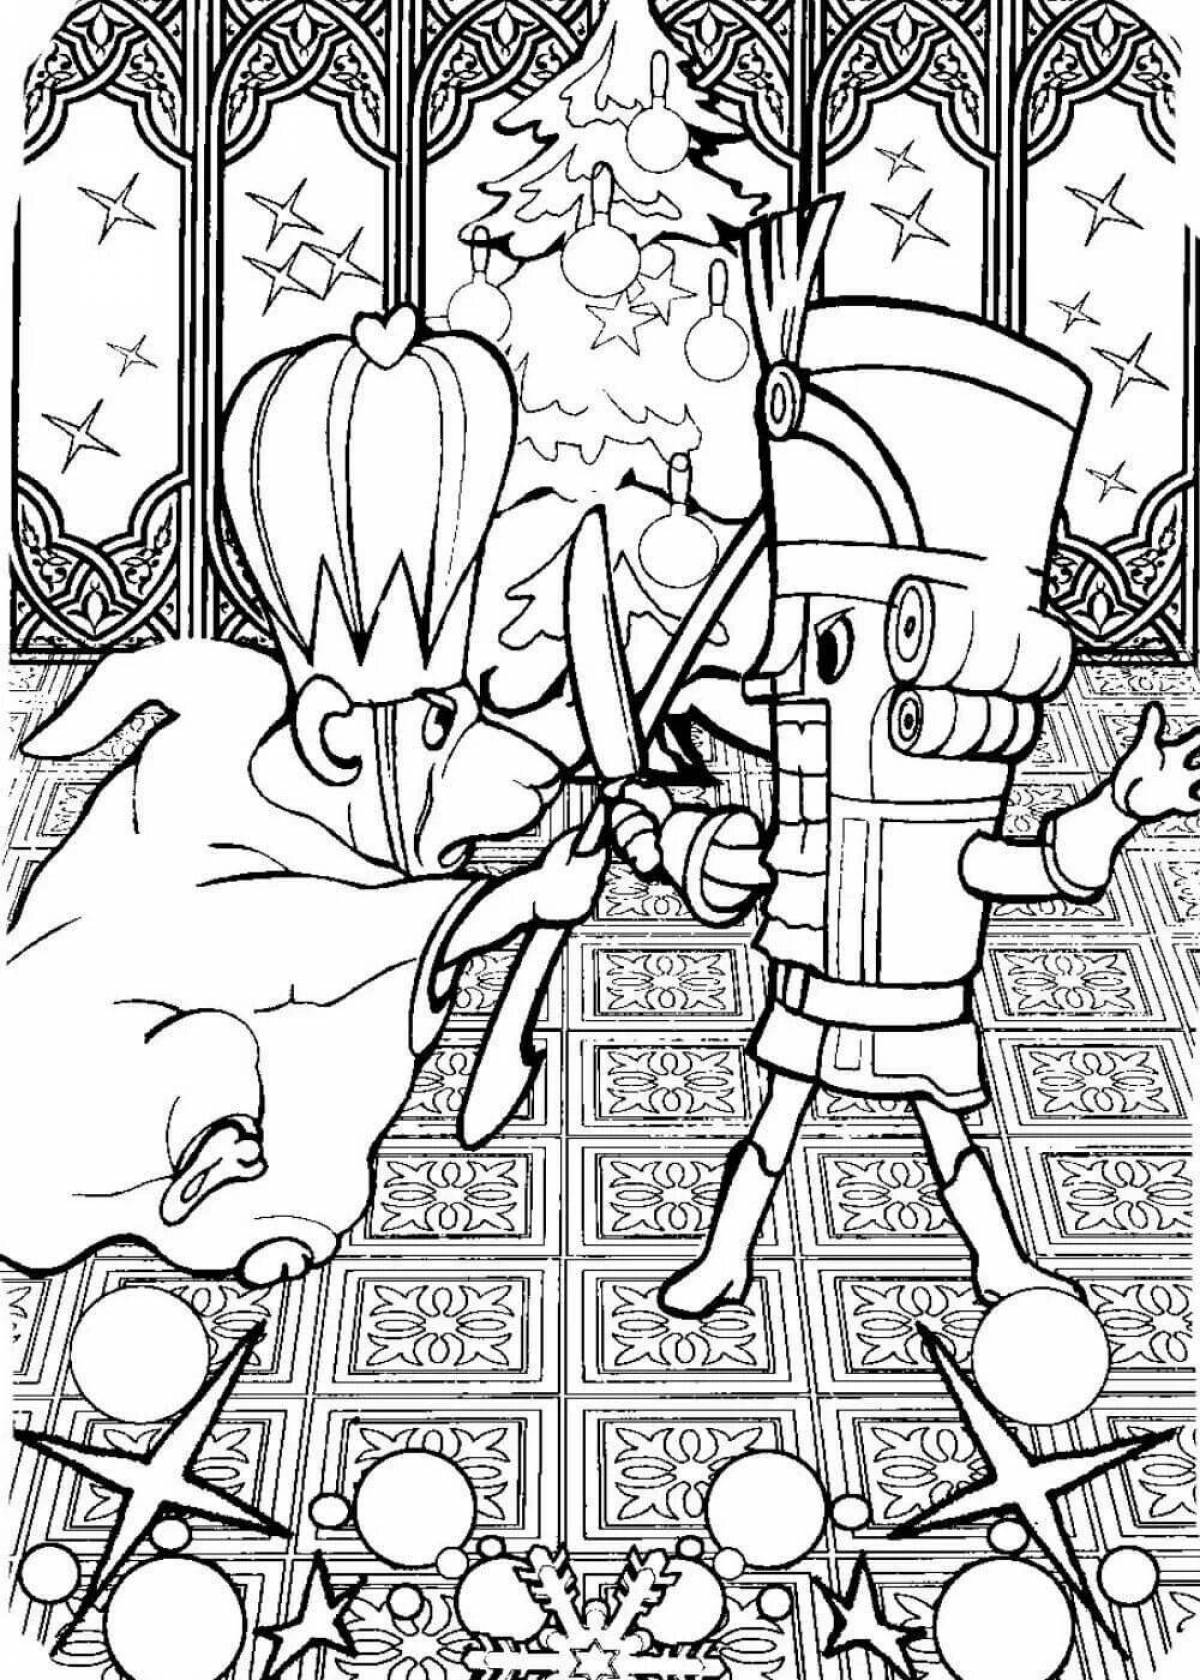 The Charming Nutcracker and the Mouse King coloring book